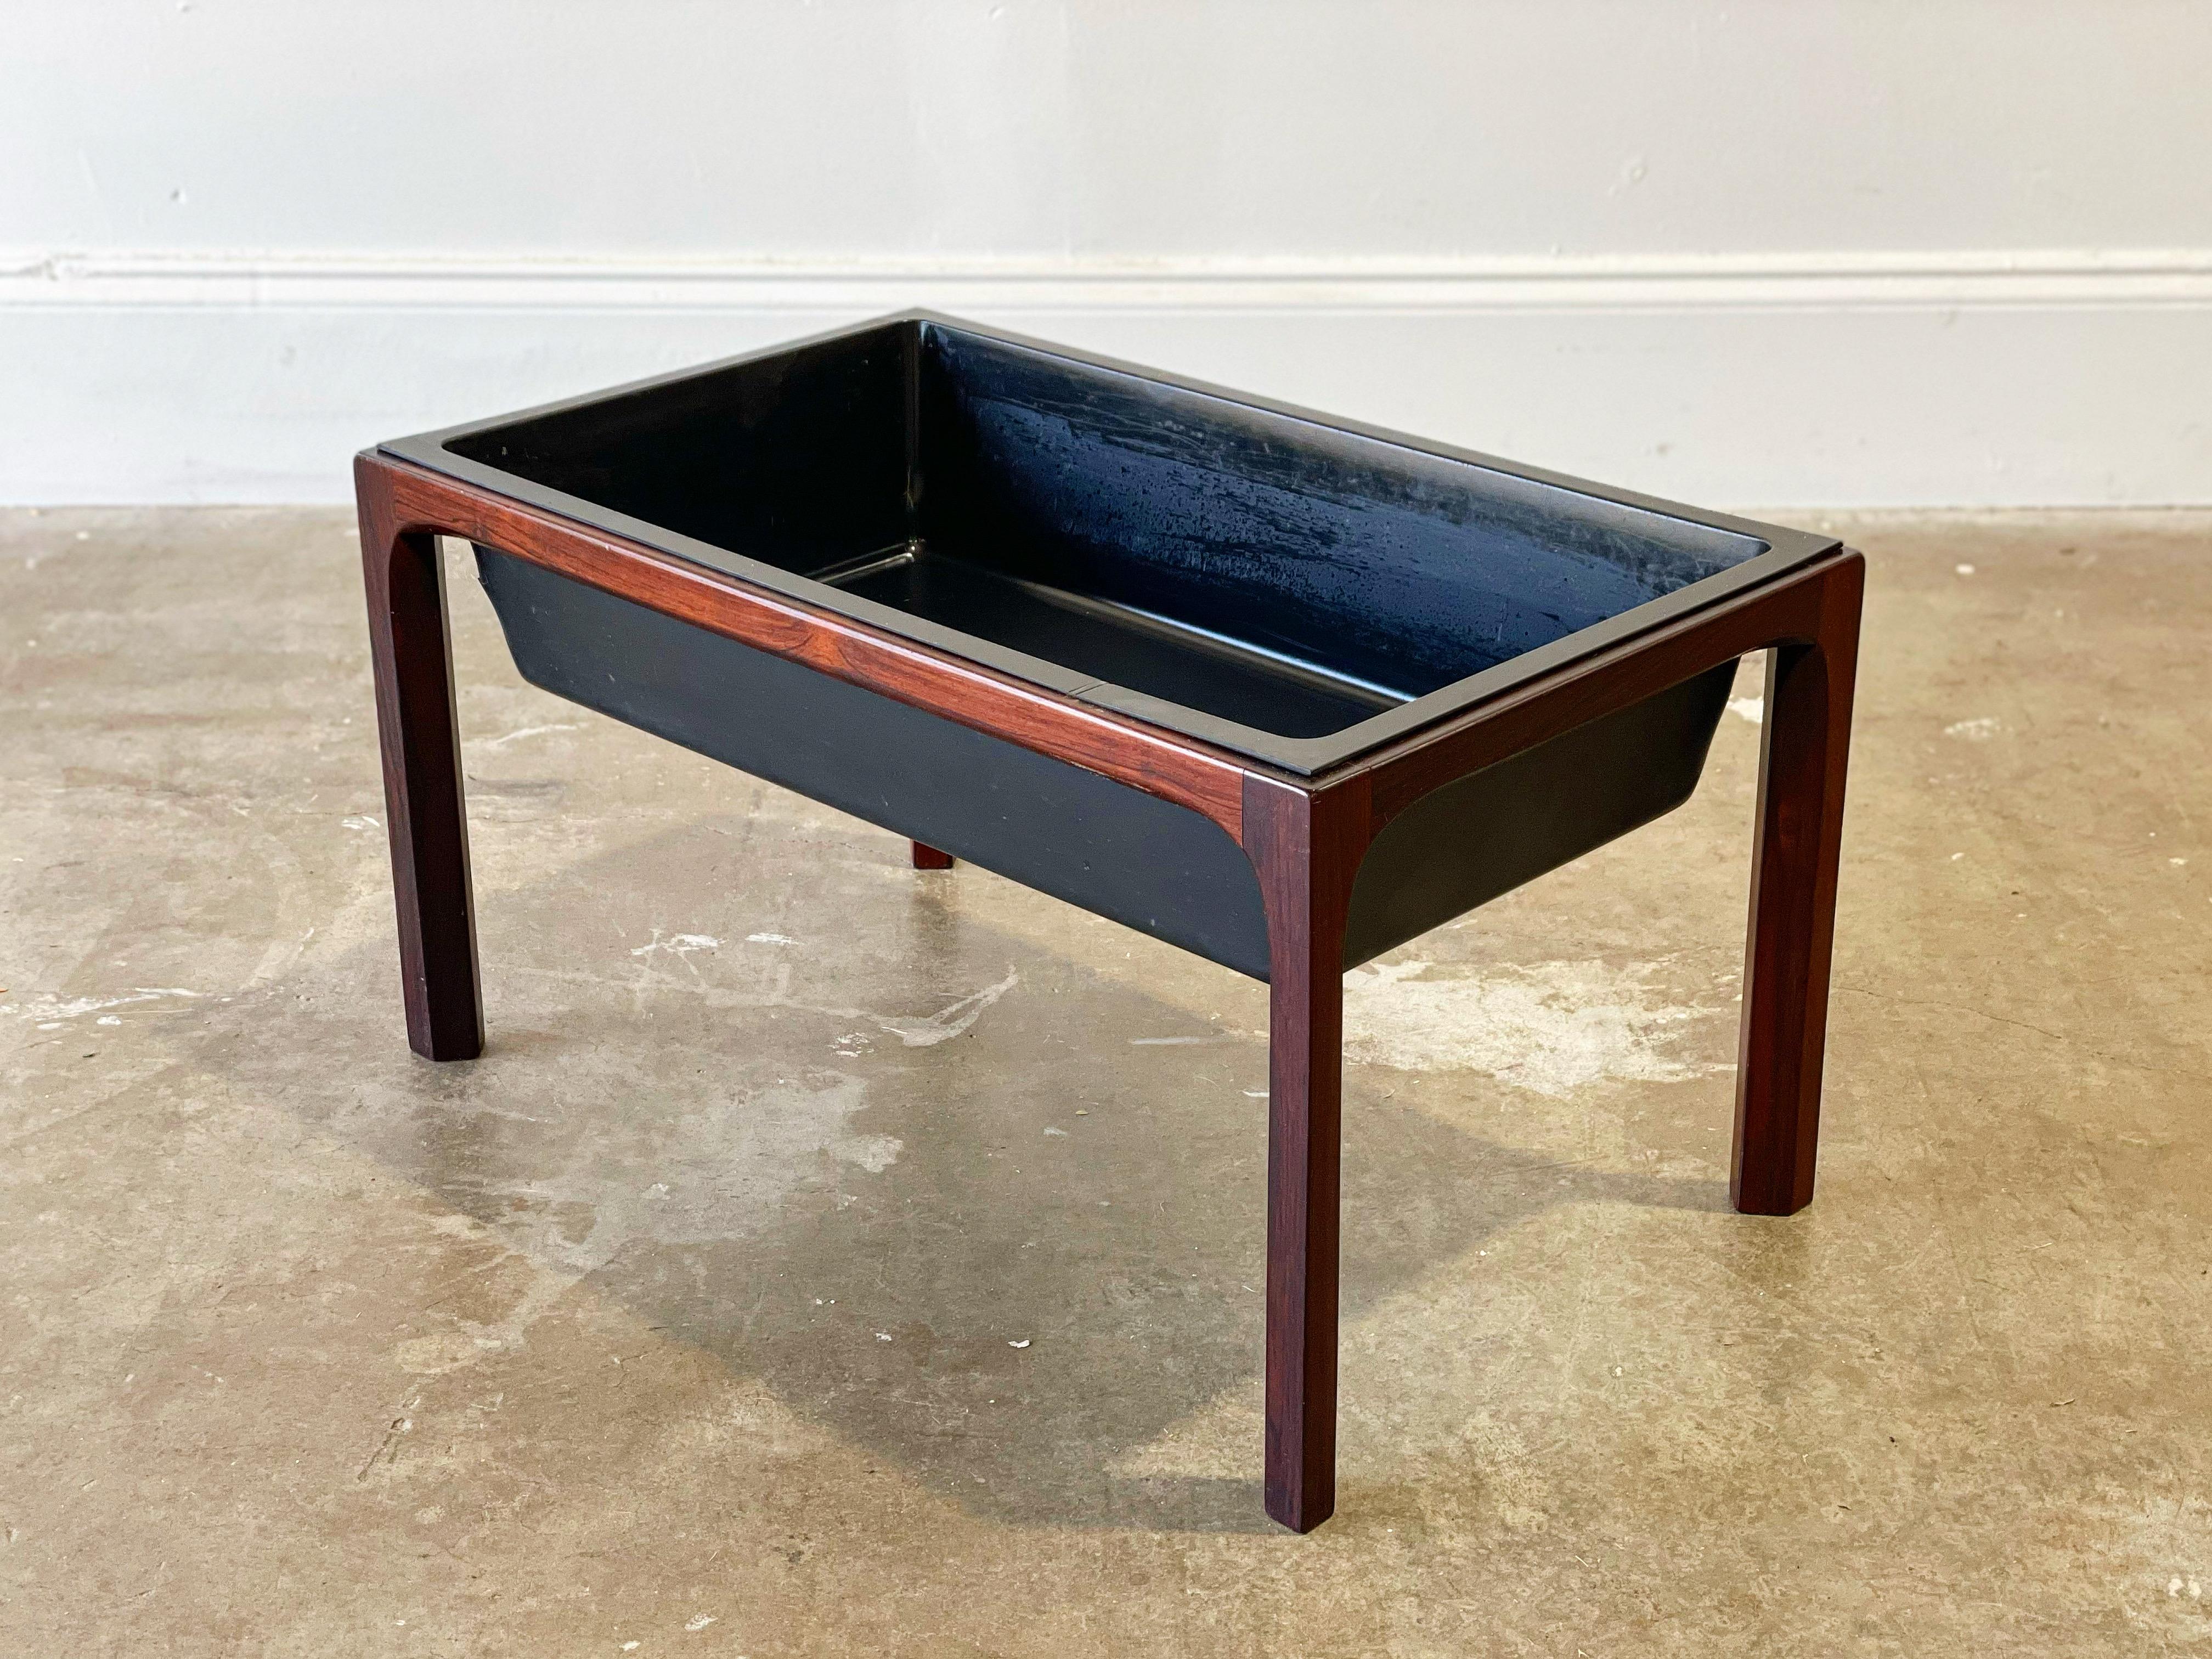 Rare rosewood planter designed by Aksel Kjersgaard for Vinde Mobelfabrik, Denmark circa 1960s. Clean modern lines featuring Kjersgaard's signature chamfered legs. Intended for indoor use. Rosewood frame is in excellent condition and displays